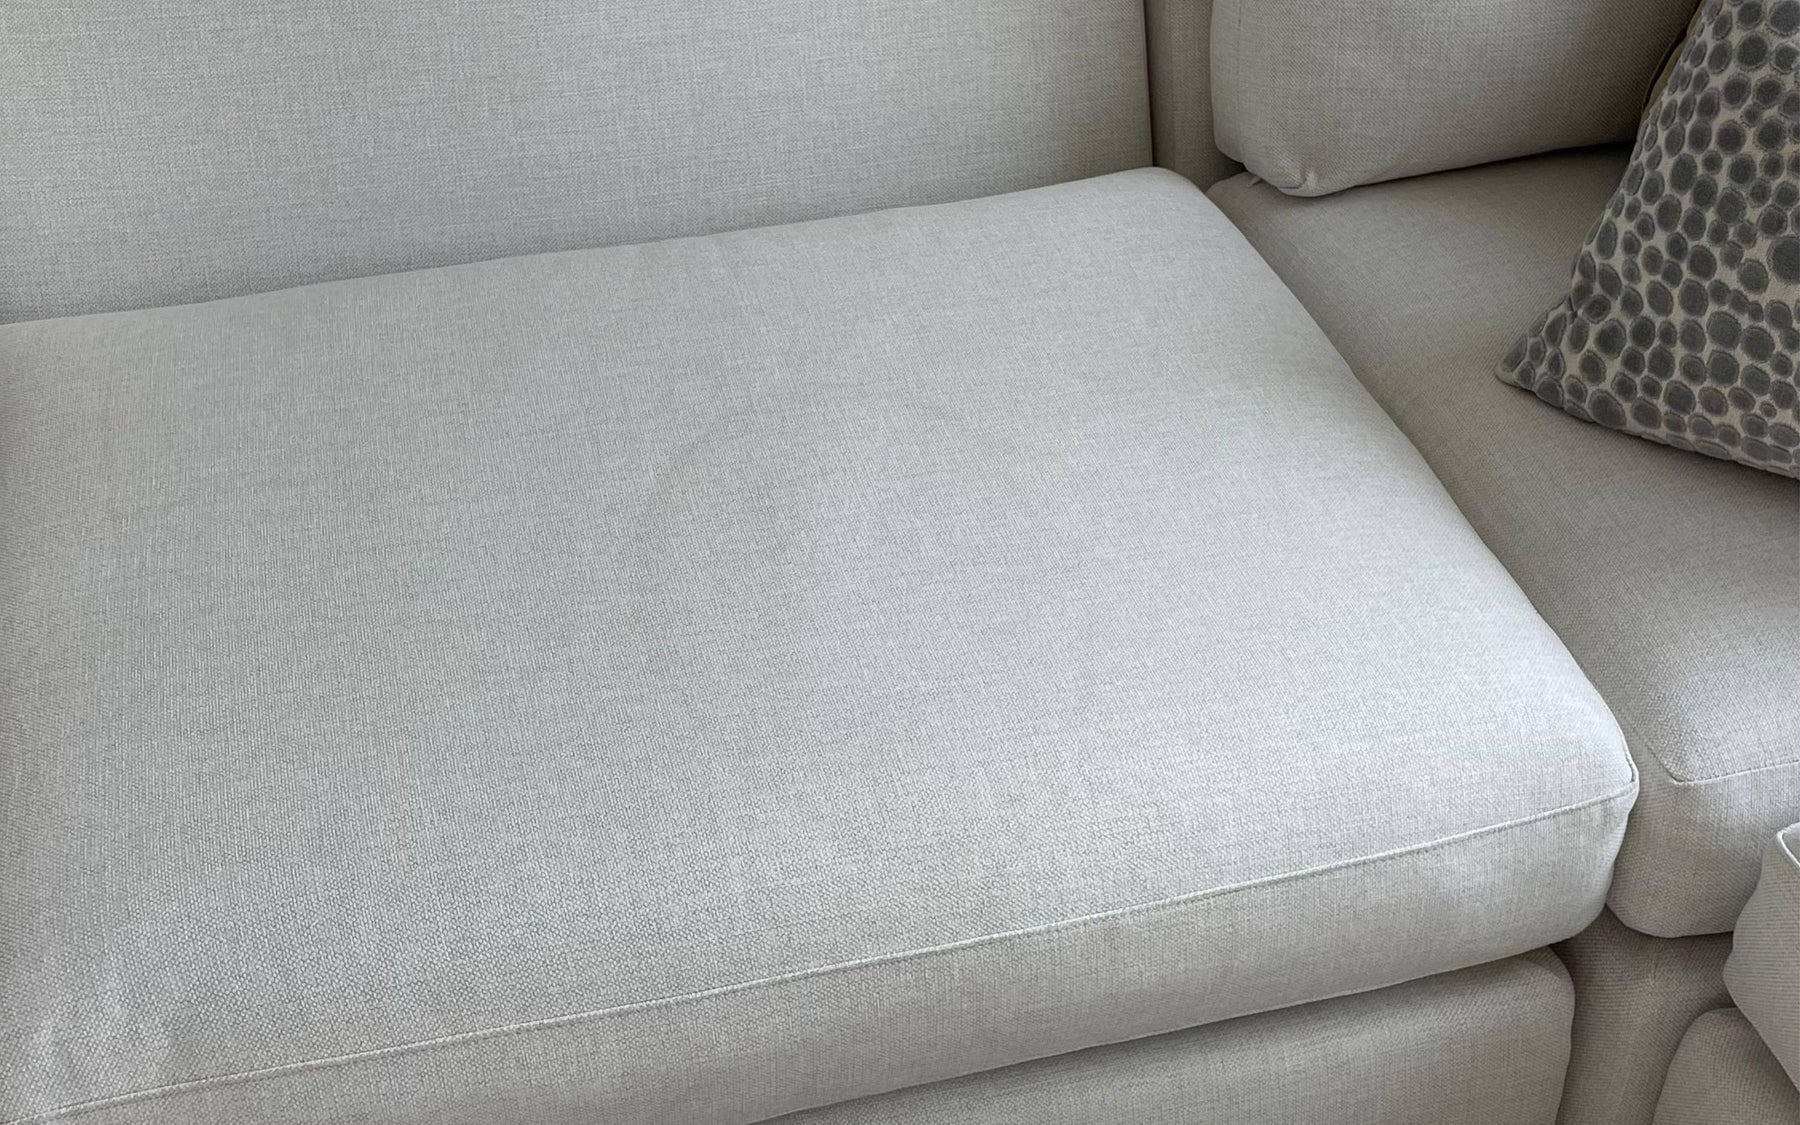 How to Remove Water Stains from Your Sofa or Couch